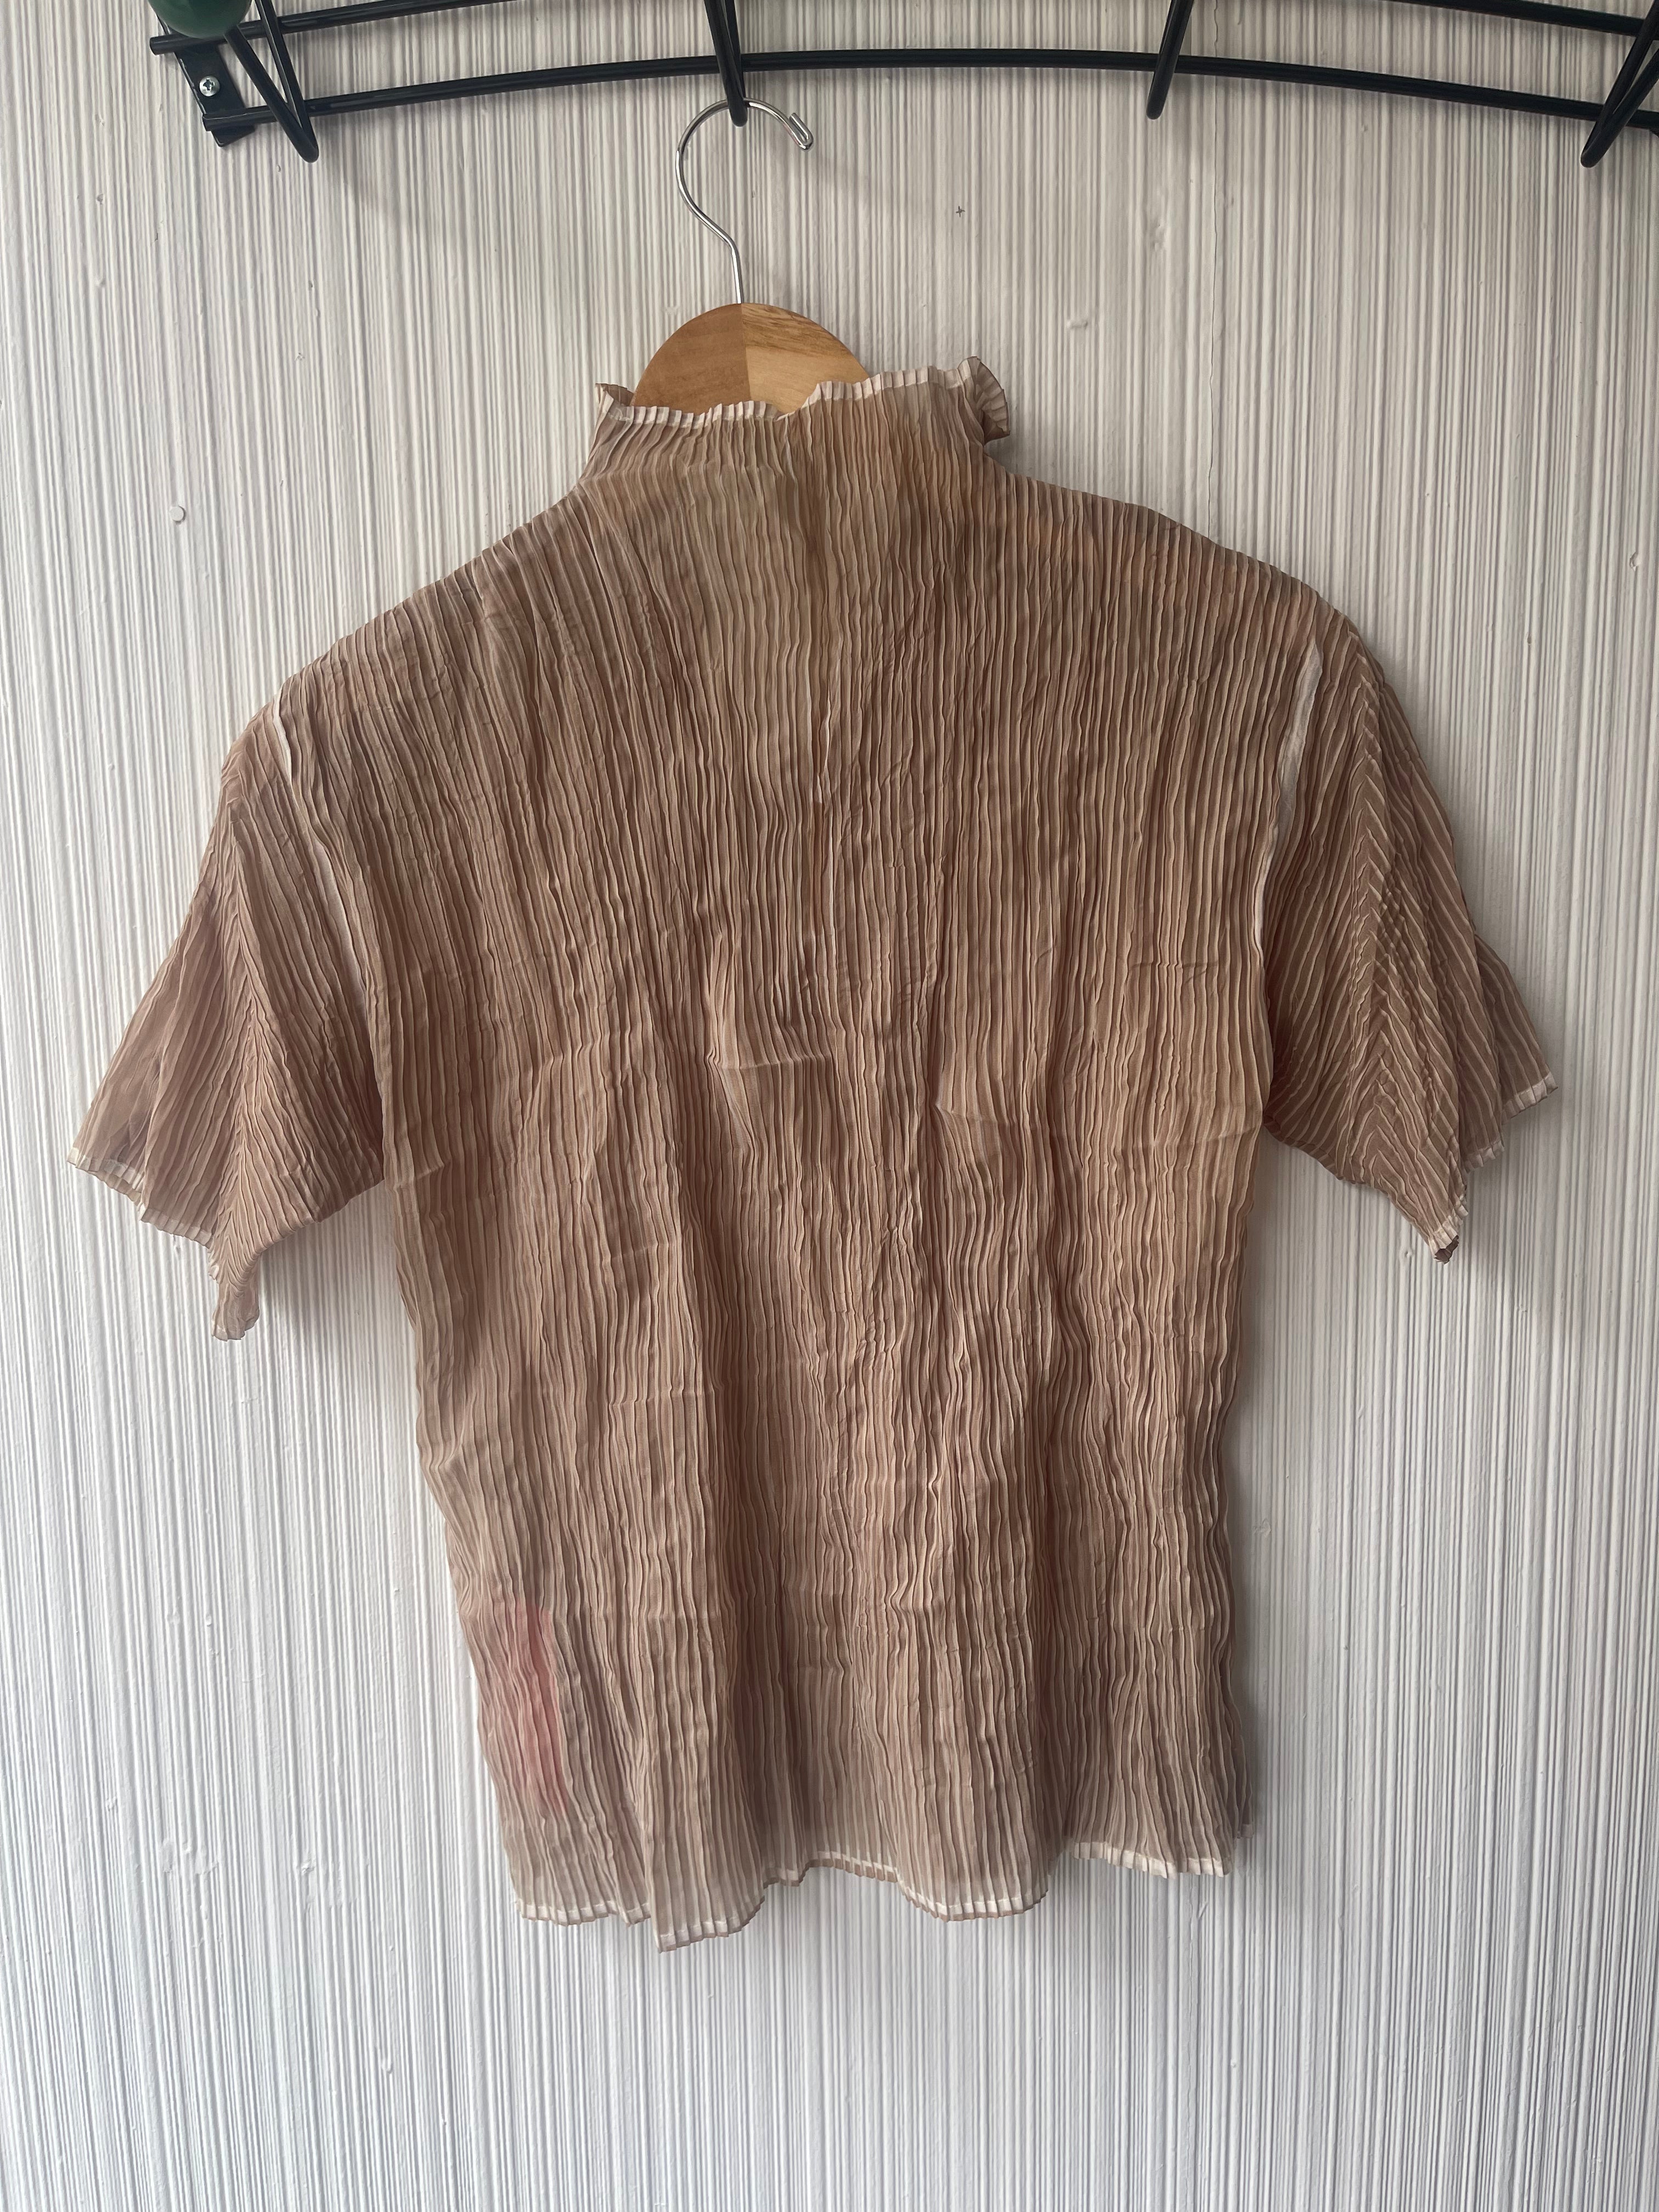 Issey Miyake brown striped pleated top